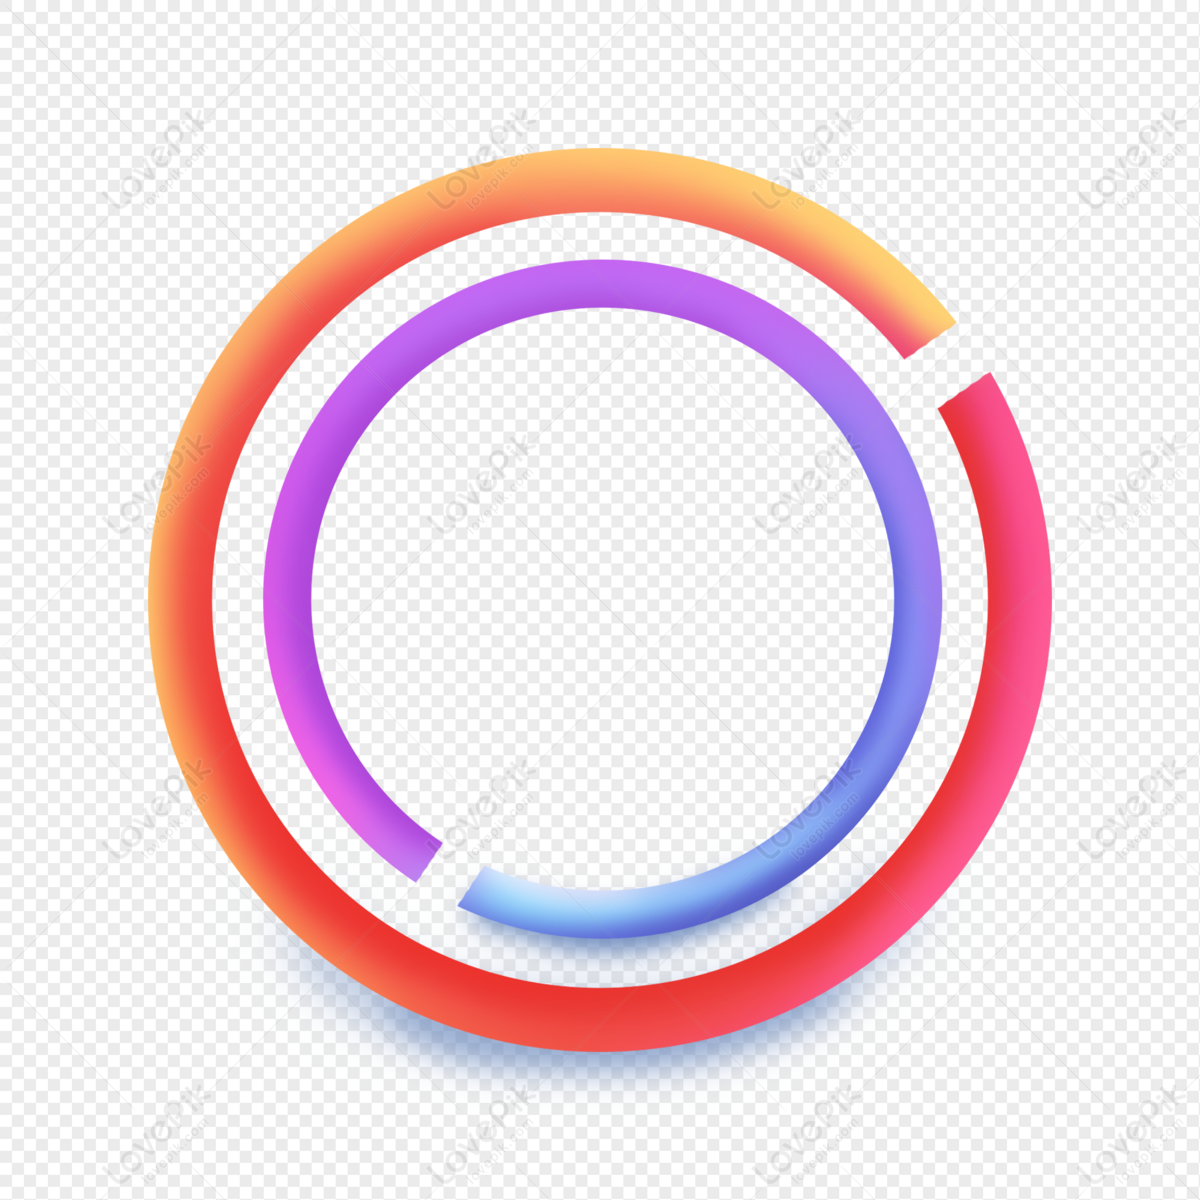 CITYPNG.COM]HD White Instagram Round Logo Icon PNG – 1600×1200 | AWARE